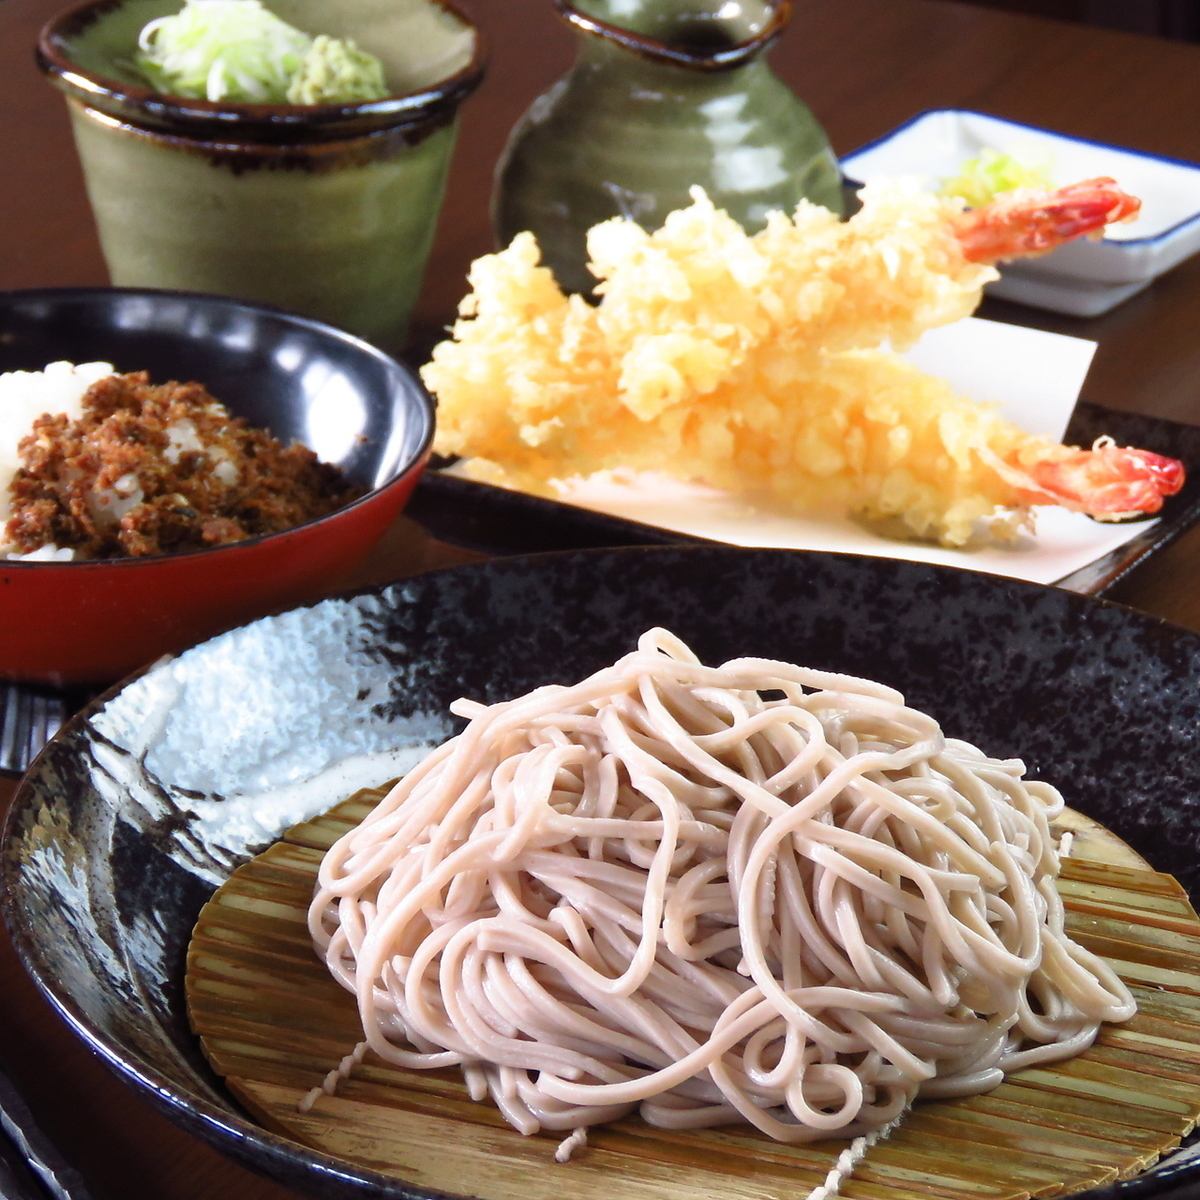 Please enjoy our proud soba and set meals.